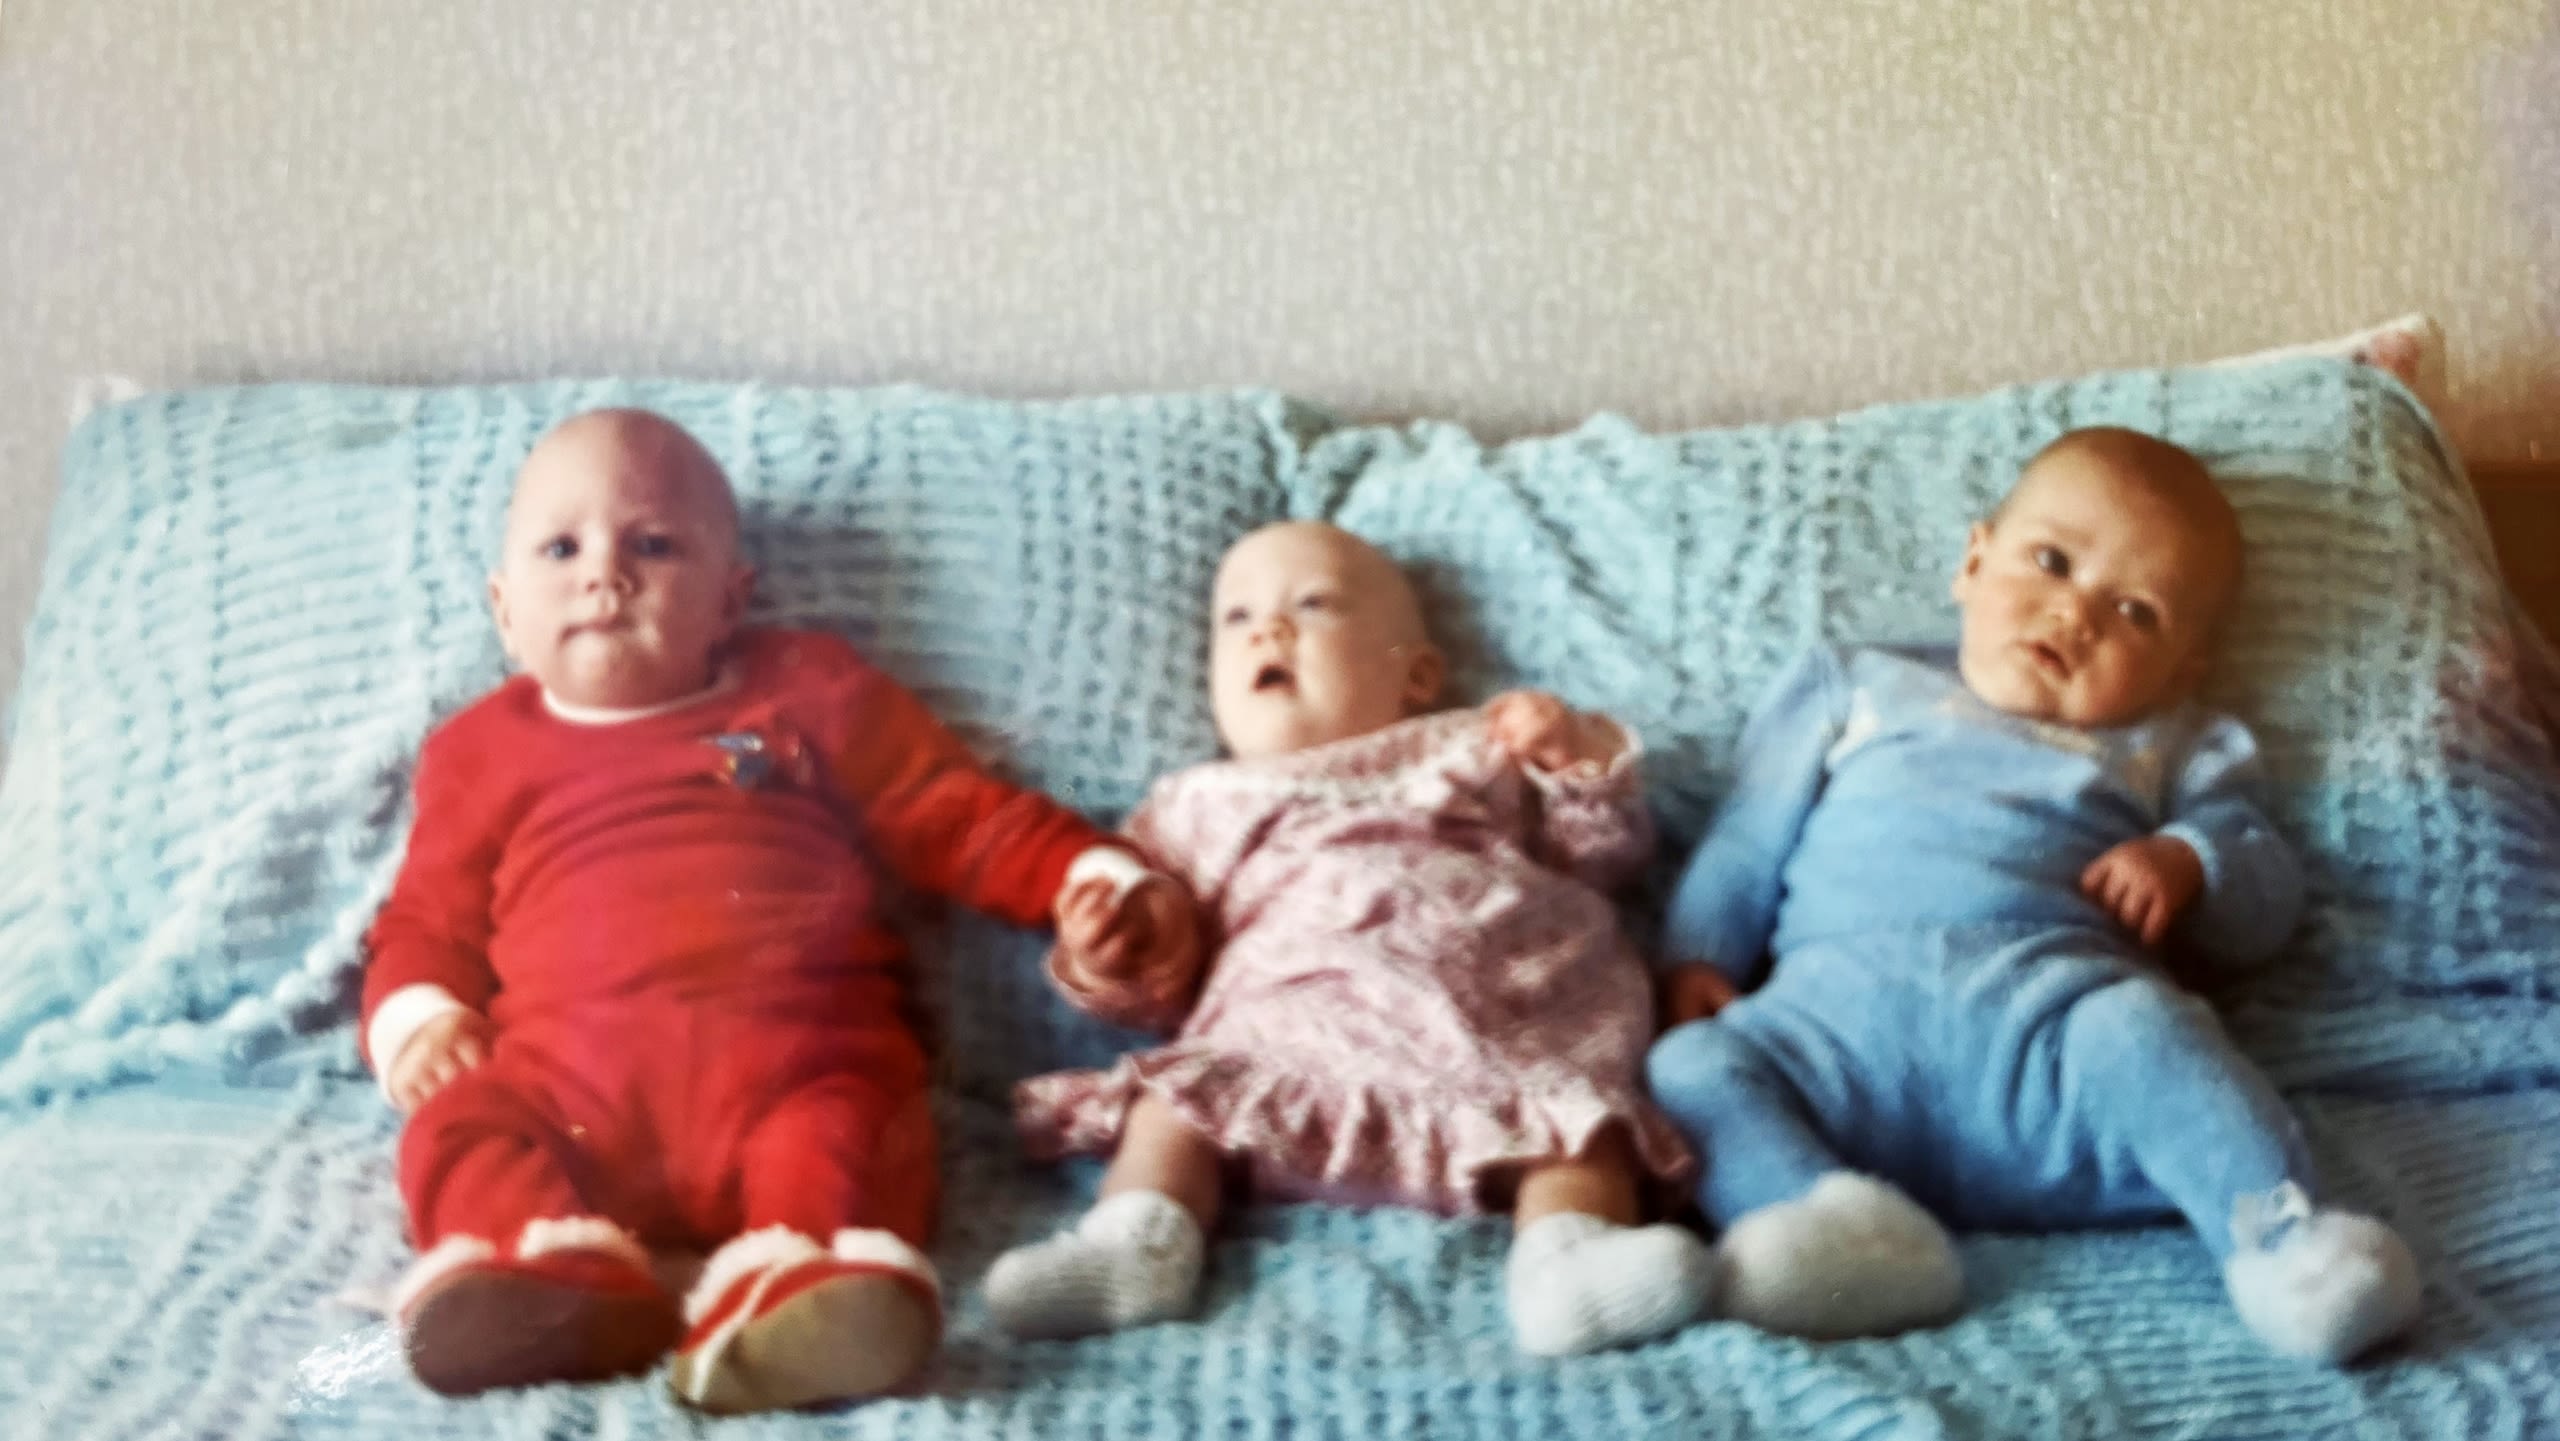 Baby Amanda, (centre) with her cousins Darryl (left) and Kaine (right). The three cousins were  born within six weeks of each other.